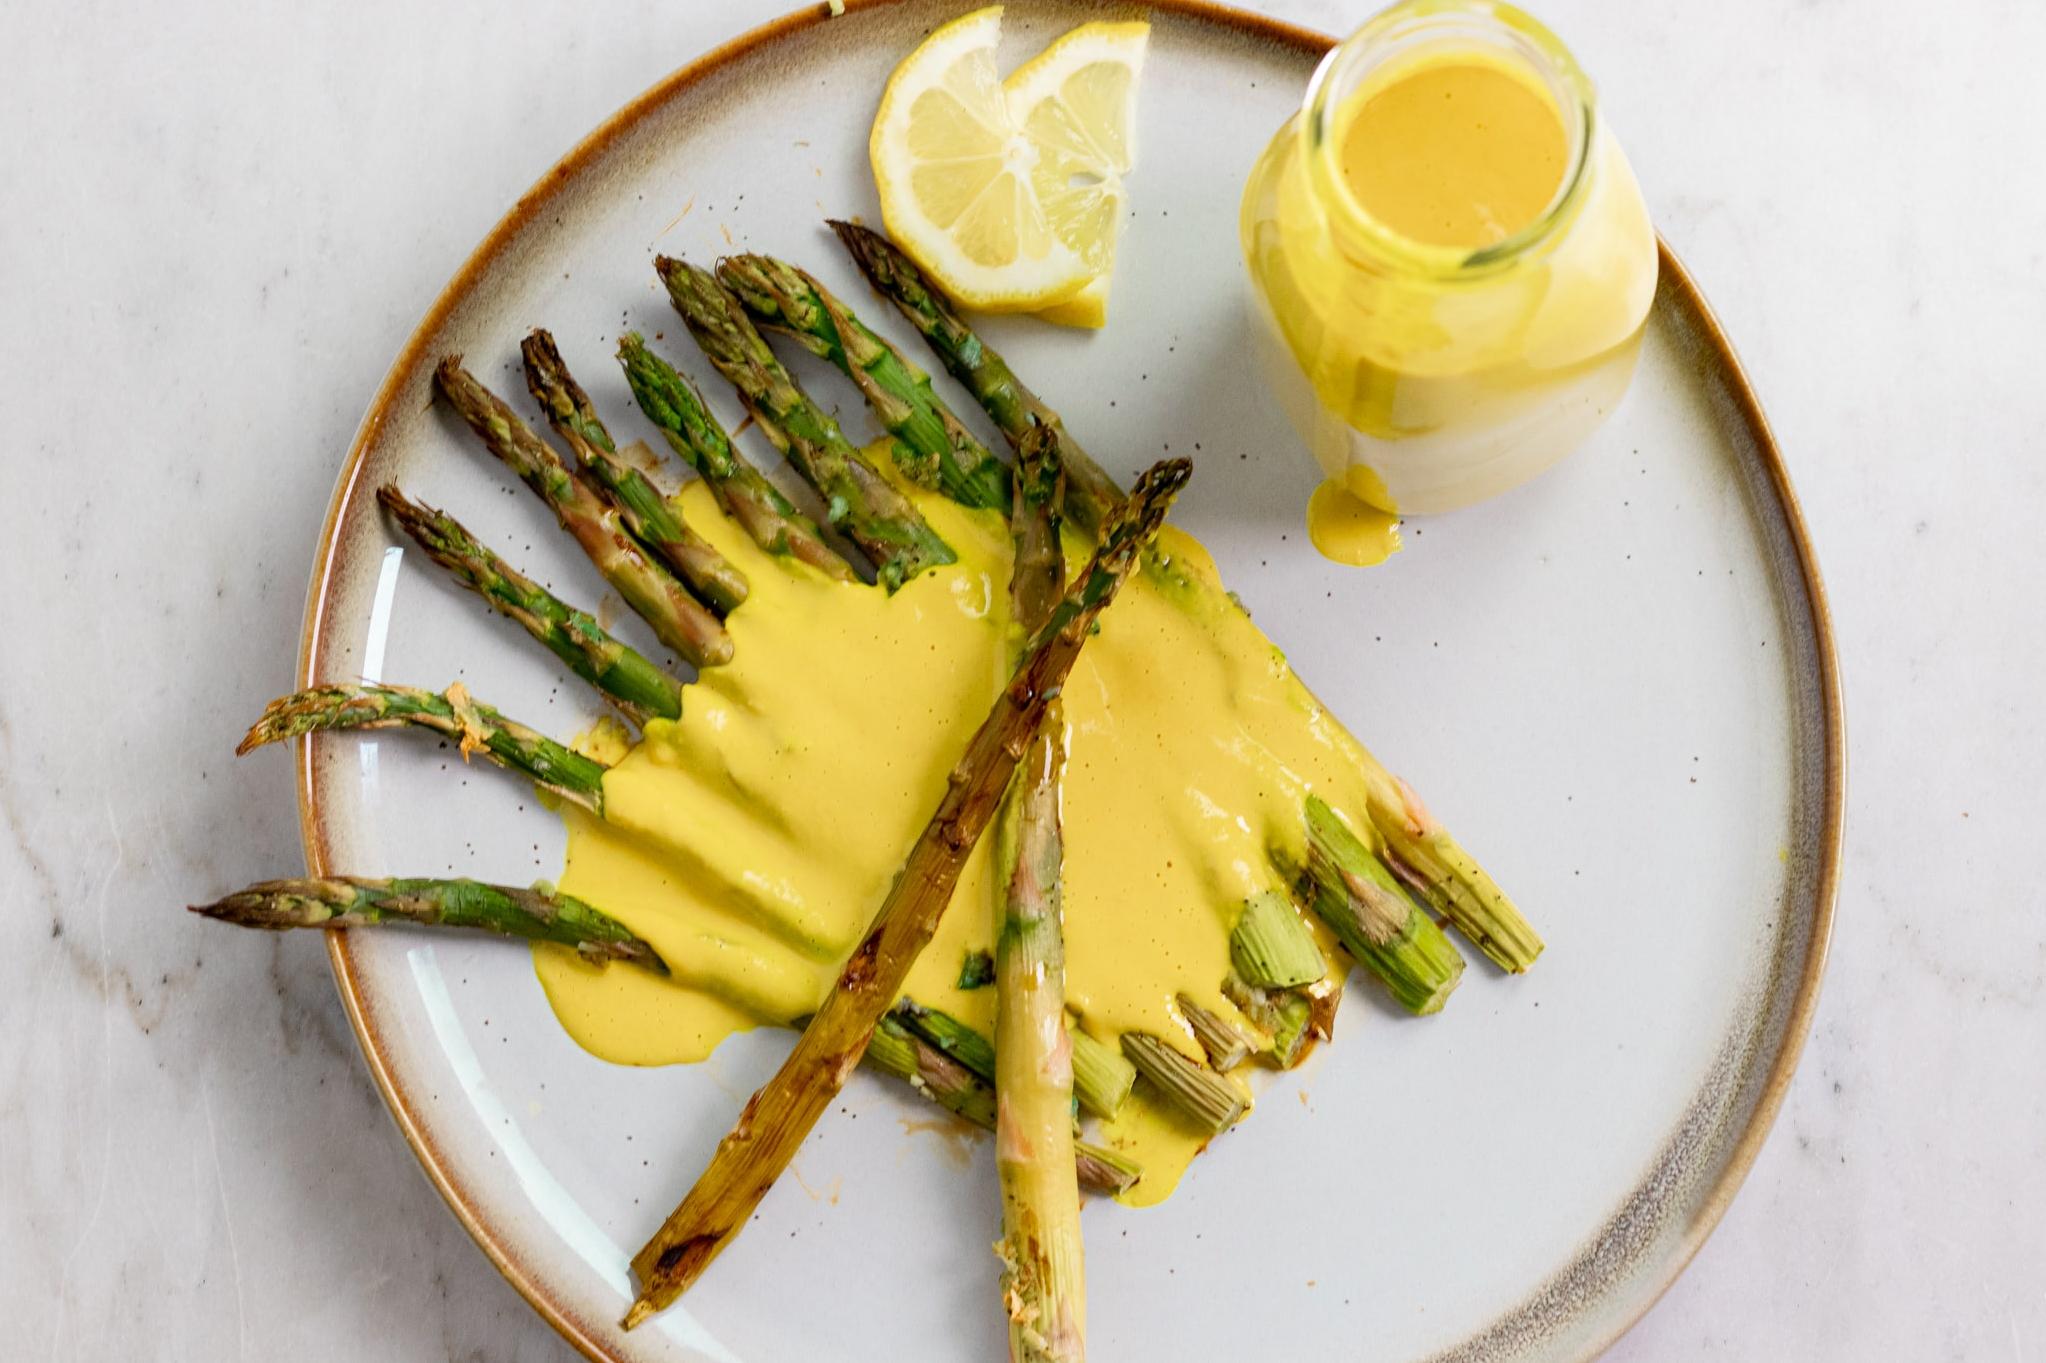  Don't let this vegan hollandaise sauce intimidate you - it's easy to make and comes together in just a few minutes